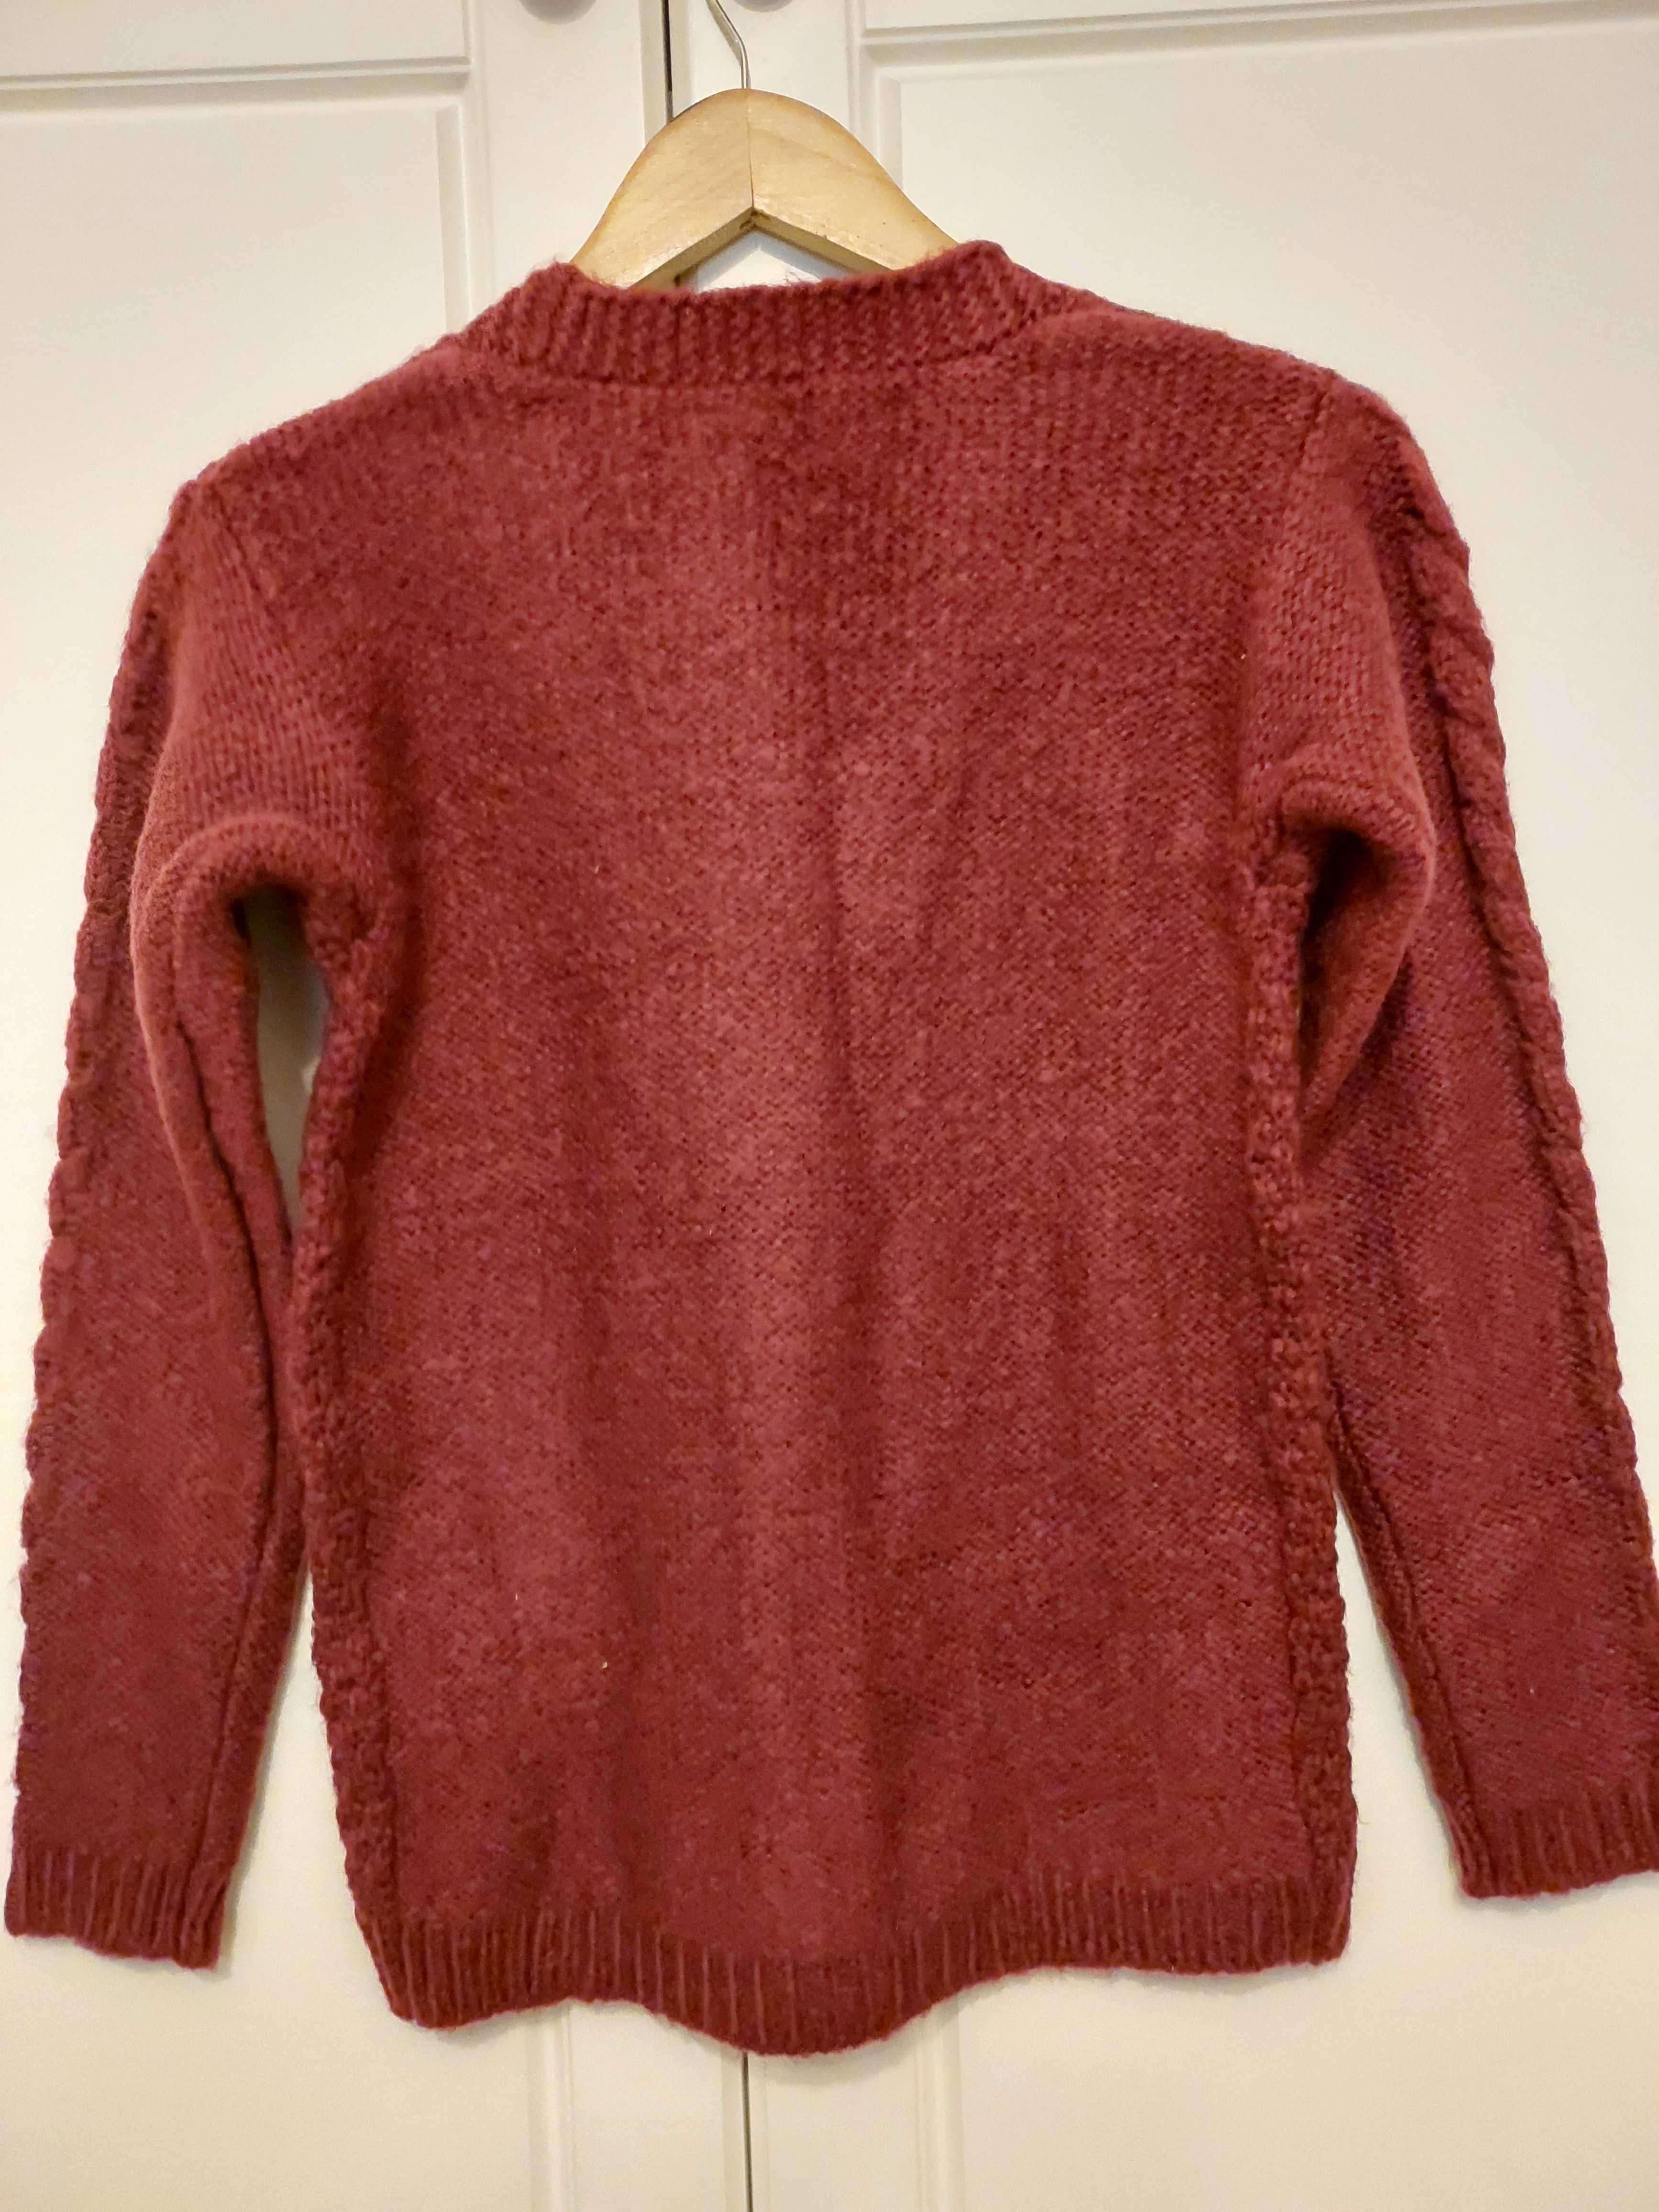 Sweter r. 146/152 NOWY